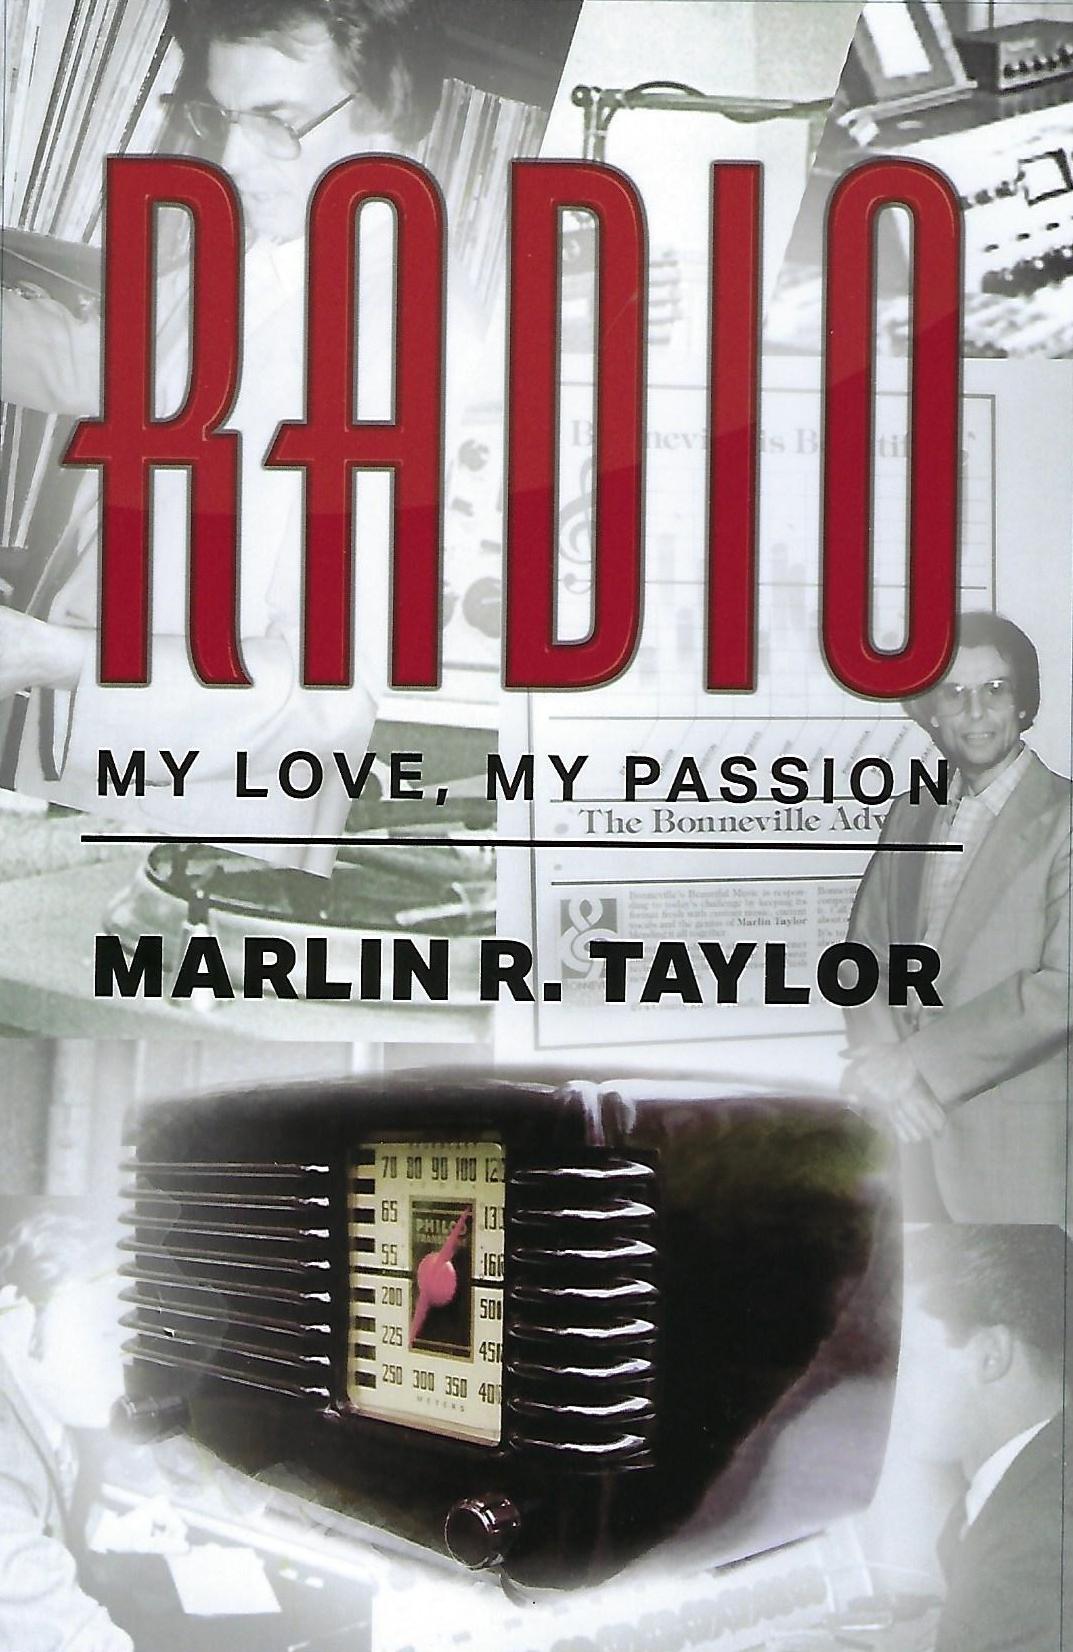 Book: My Love, My Passion